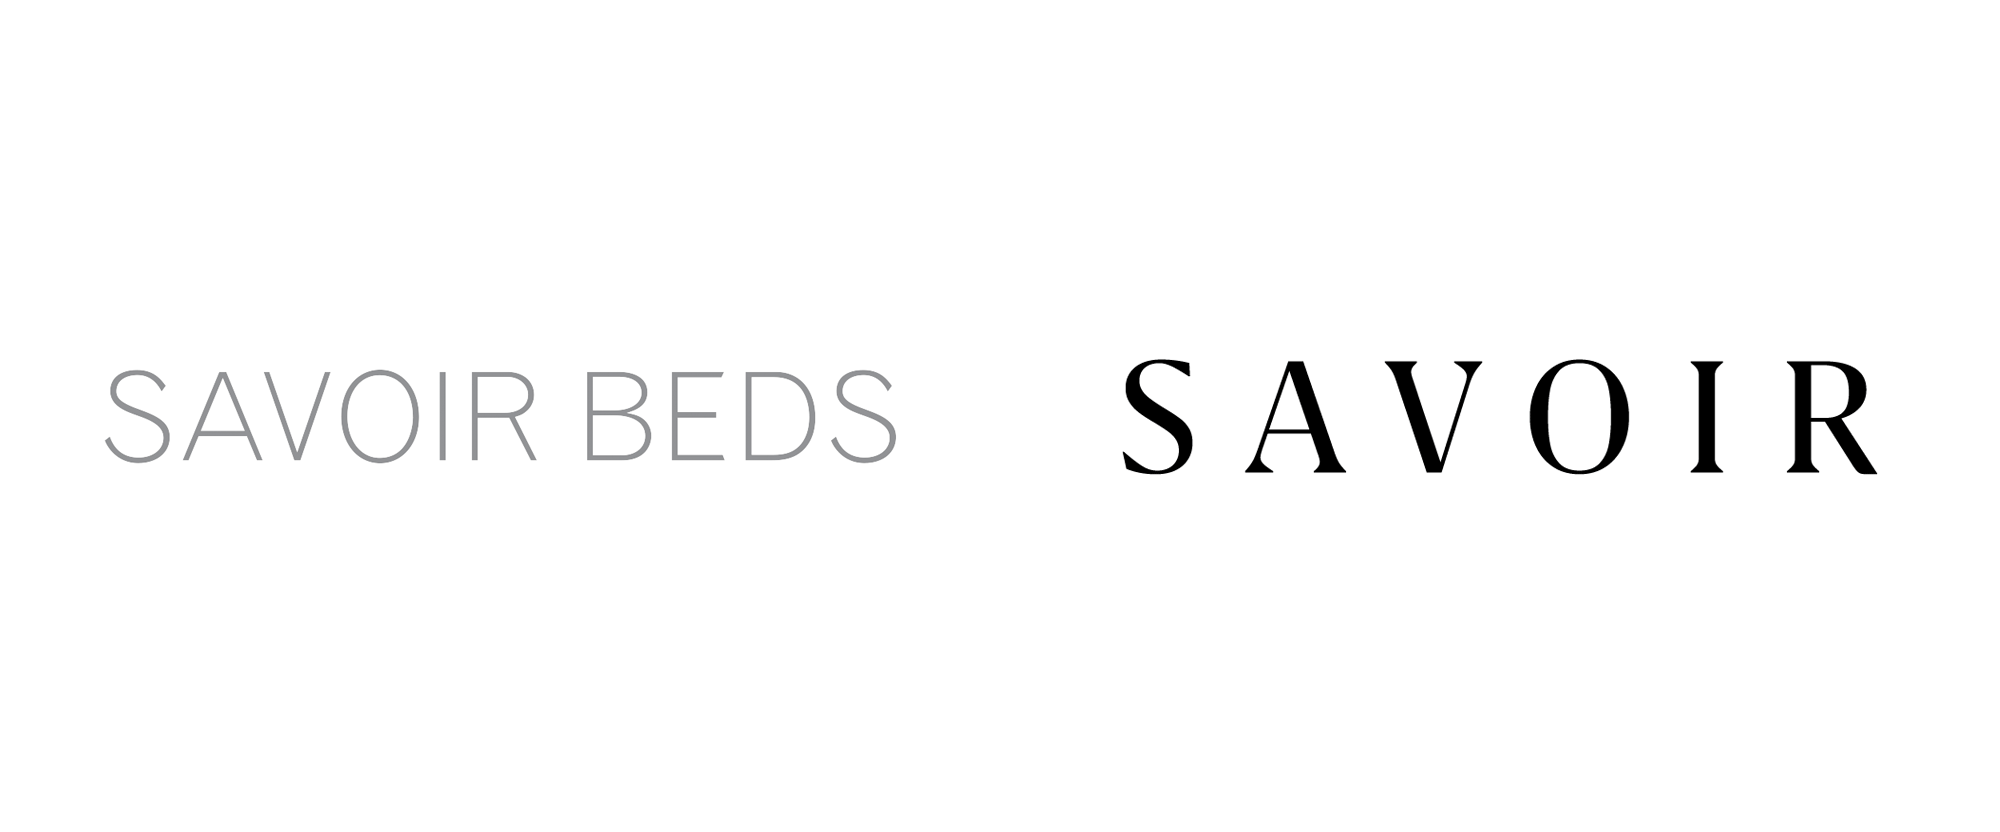 New Logo and Identity for Savoir Beds by Without